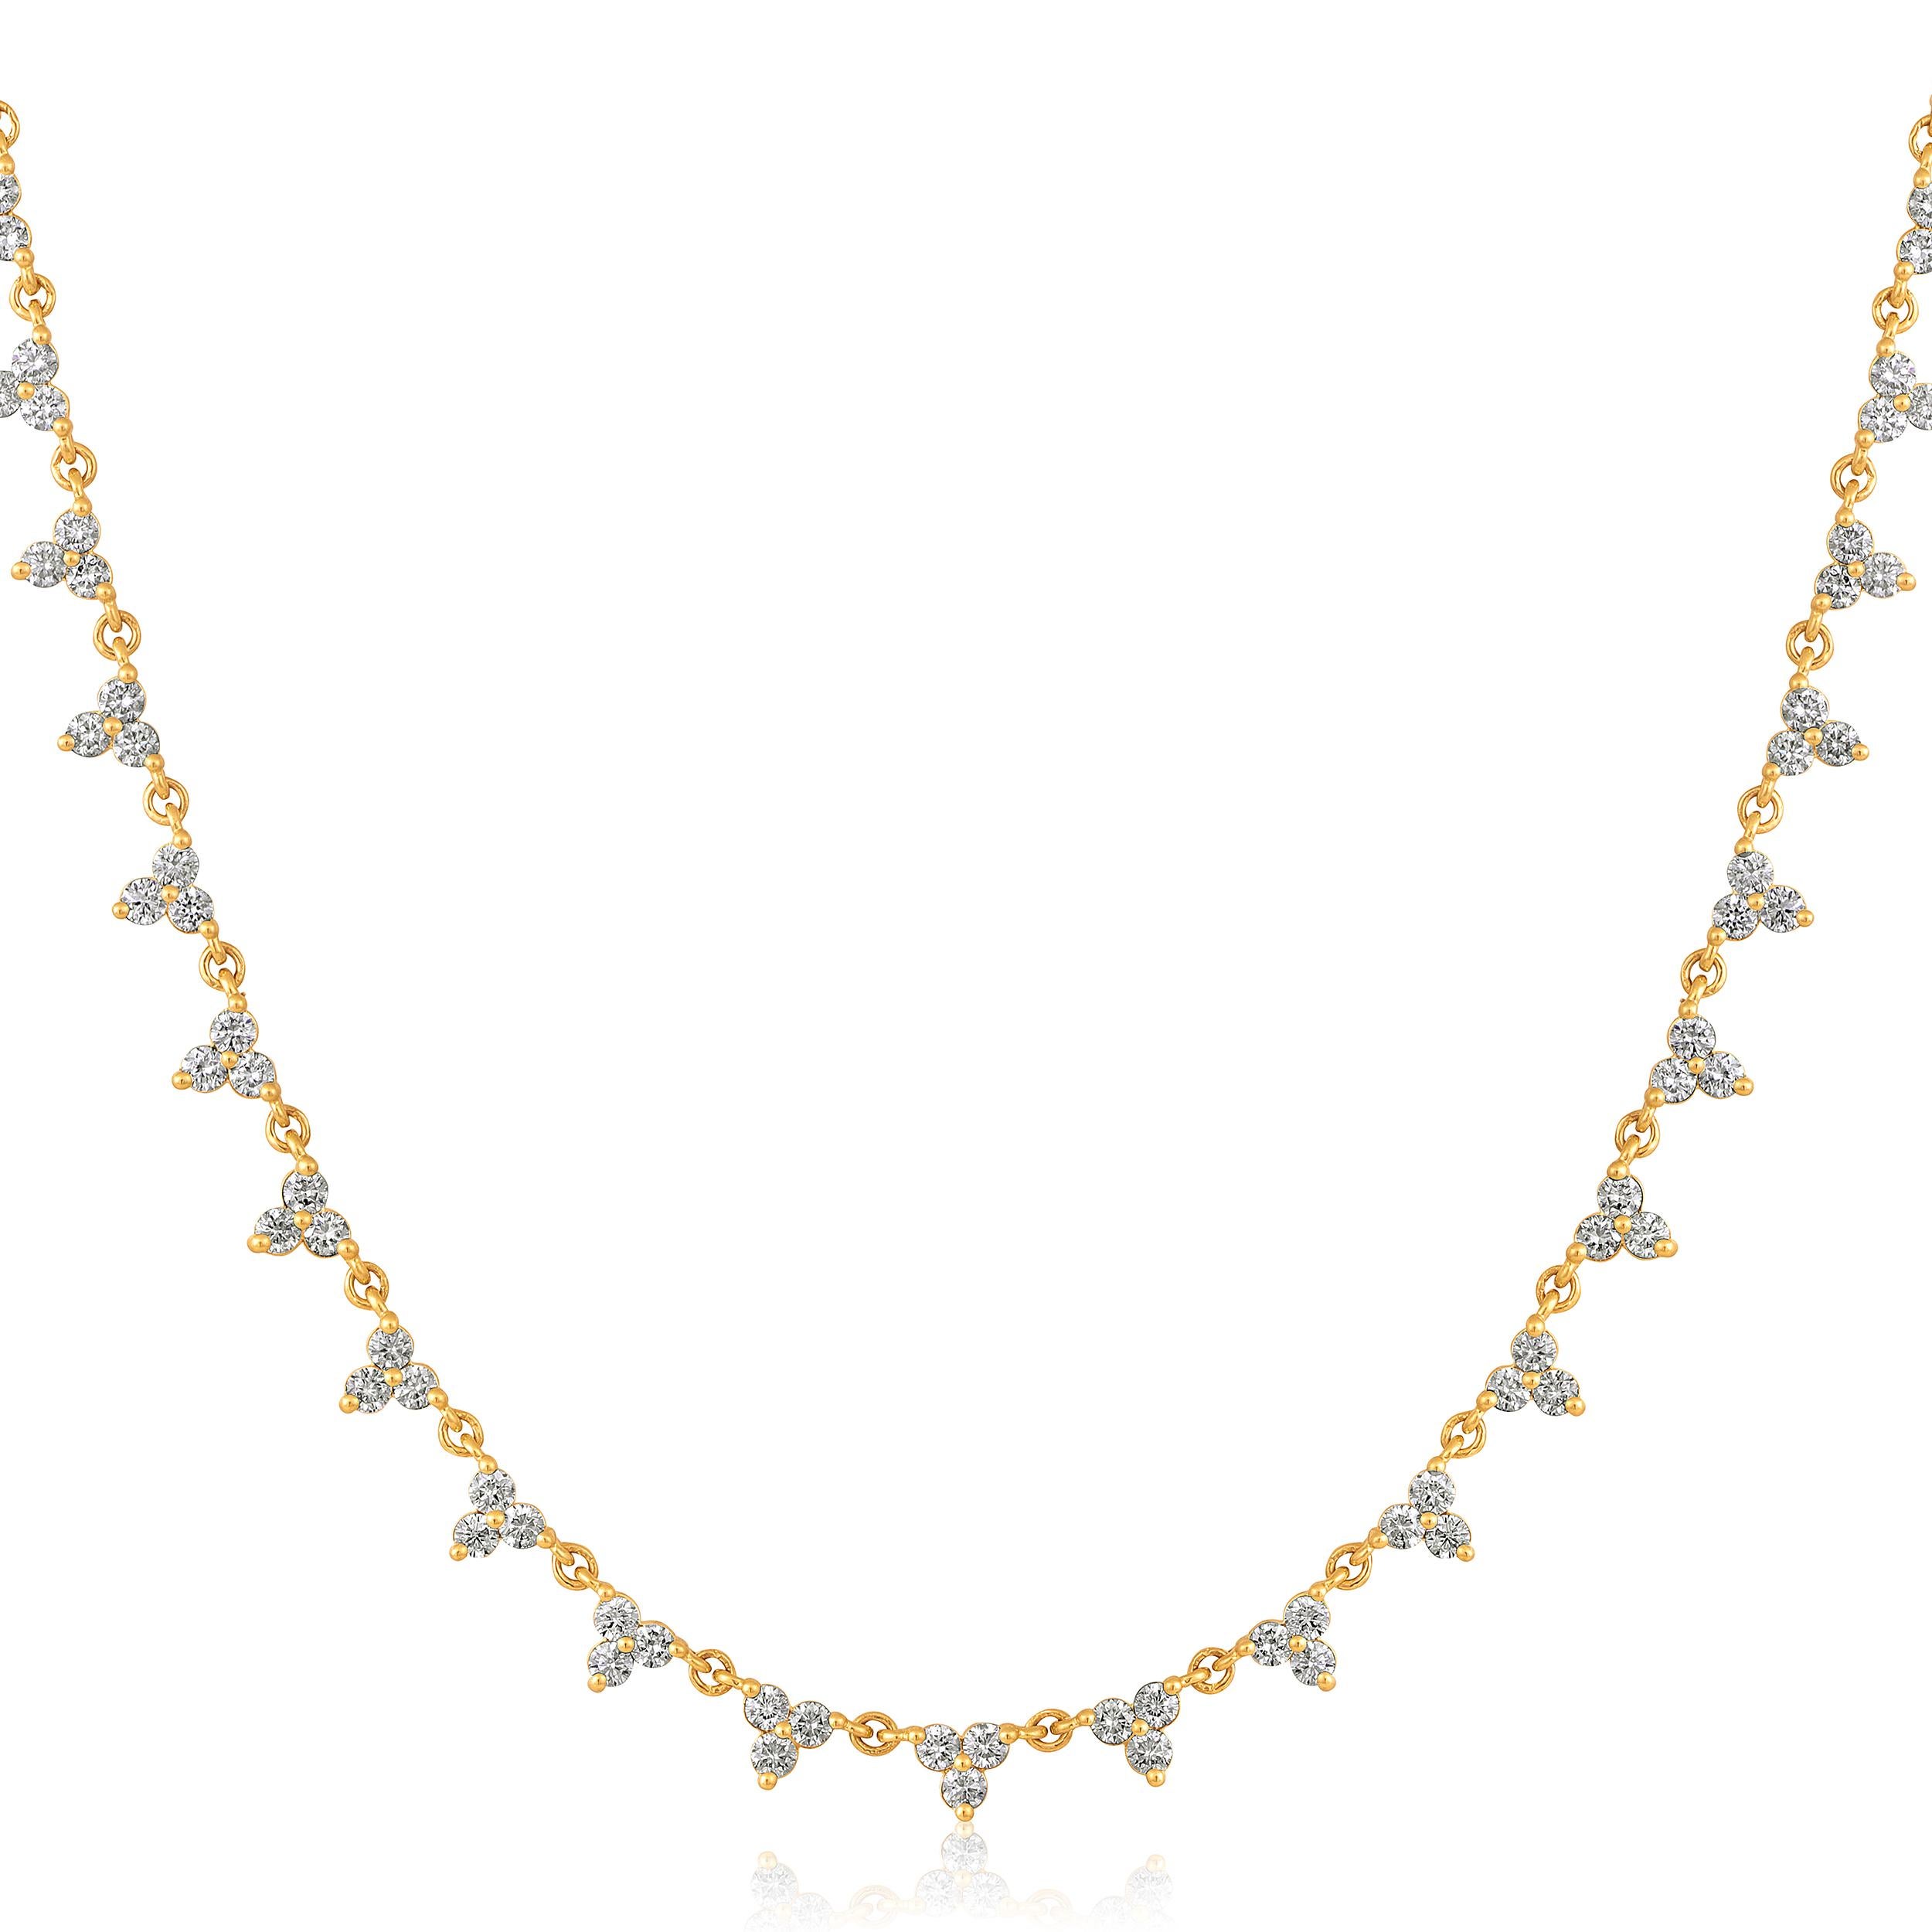 Crafted in 7.9 grams of 14K Yellow Gold, the necklace contains 81 stones of Round Natural Diamonds with a total of 2.38 carat in F-G color and SI clarity. The necklace length is 18 inches.
This jewelry piece will be expertly crafted by our skilled